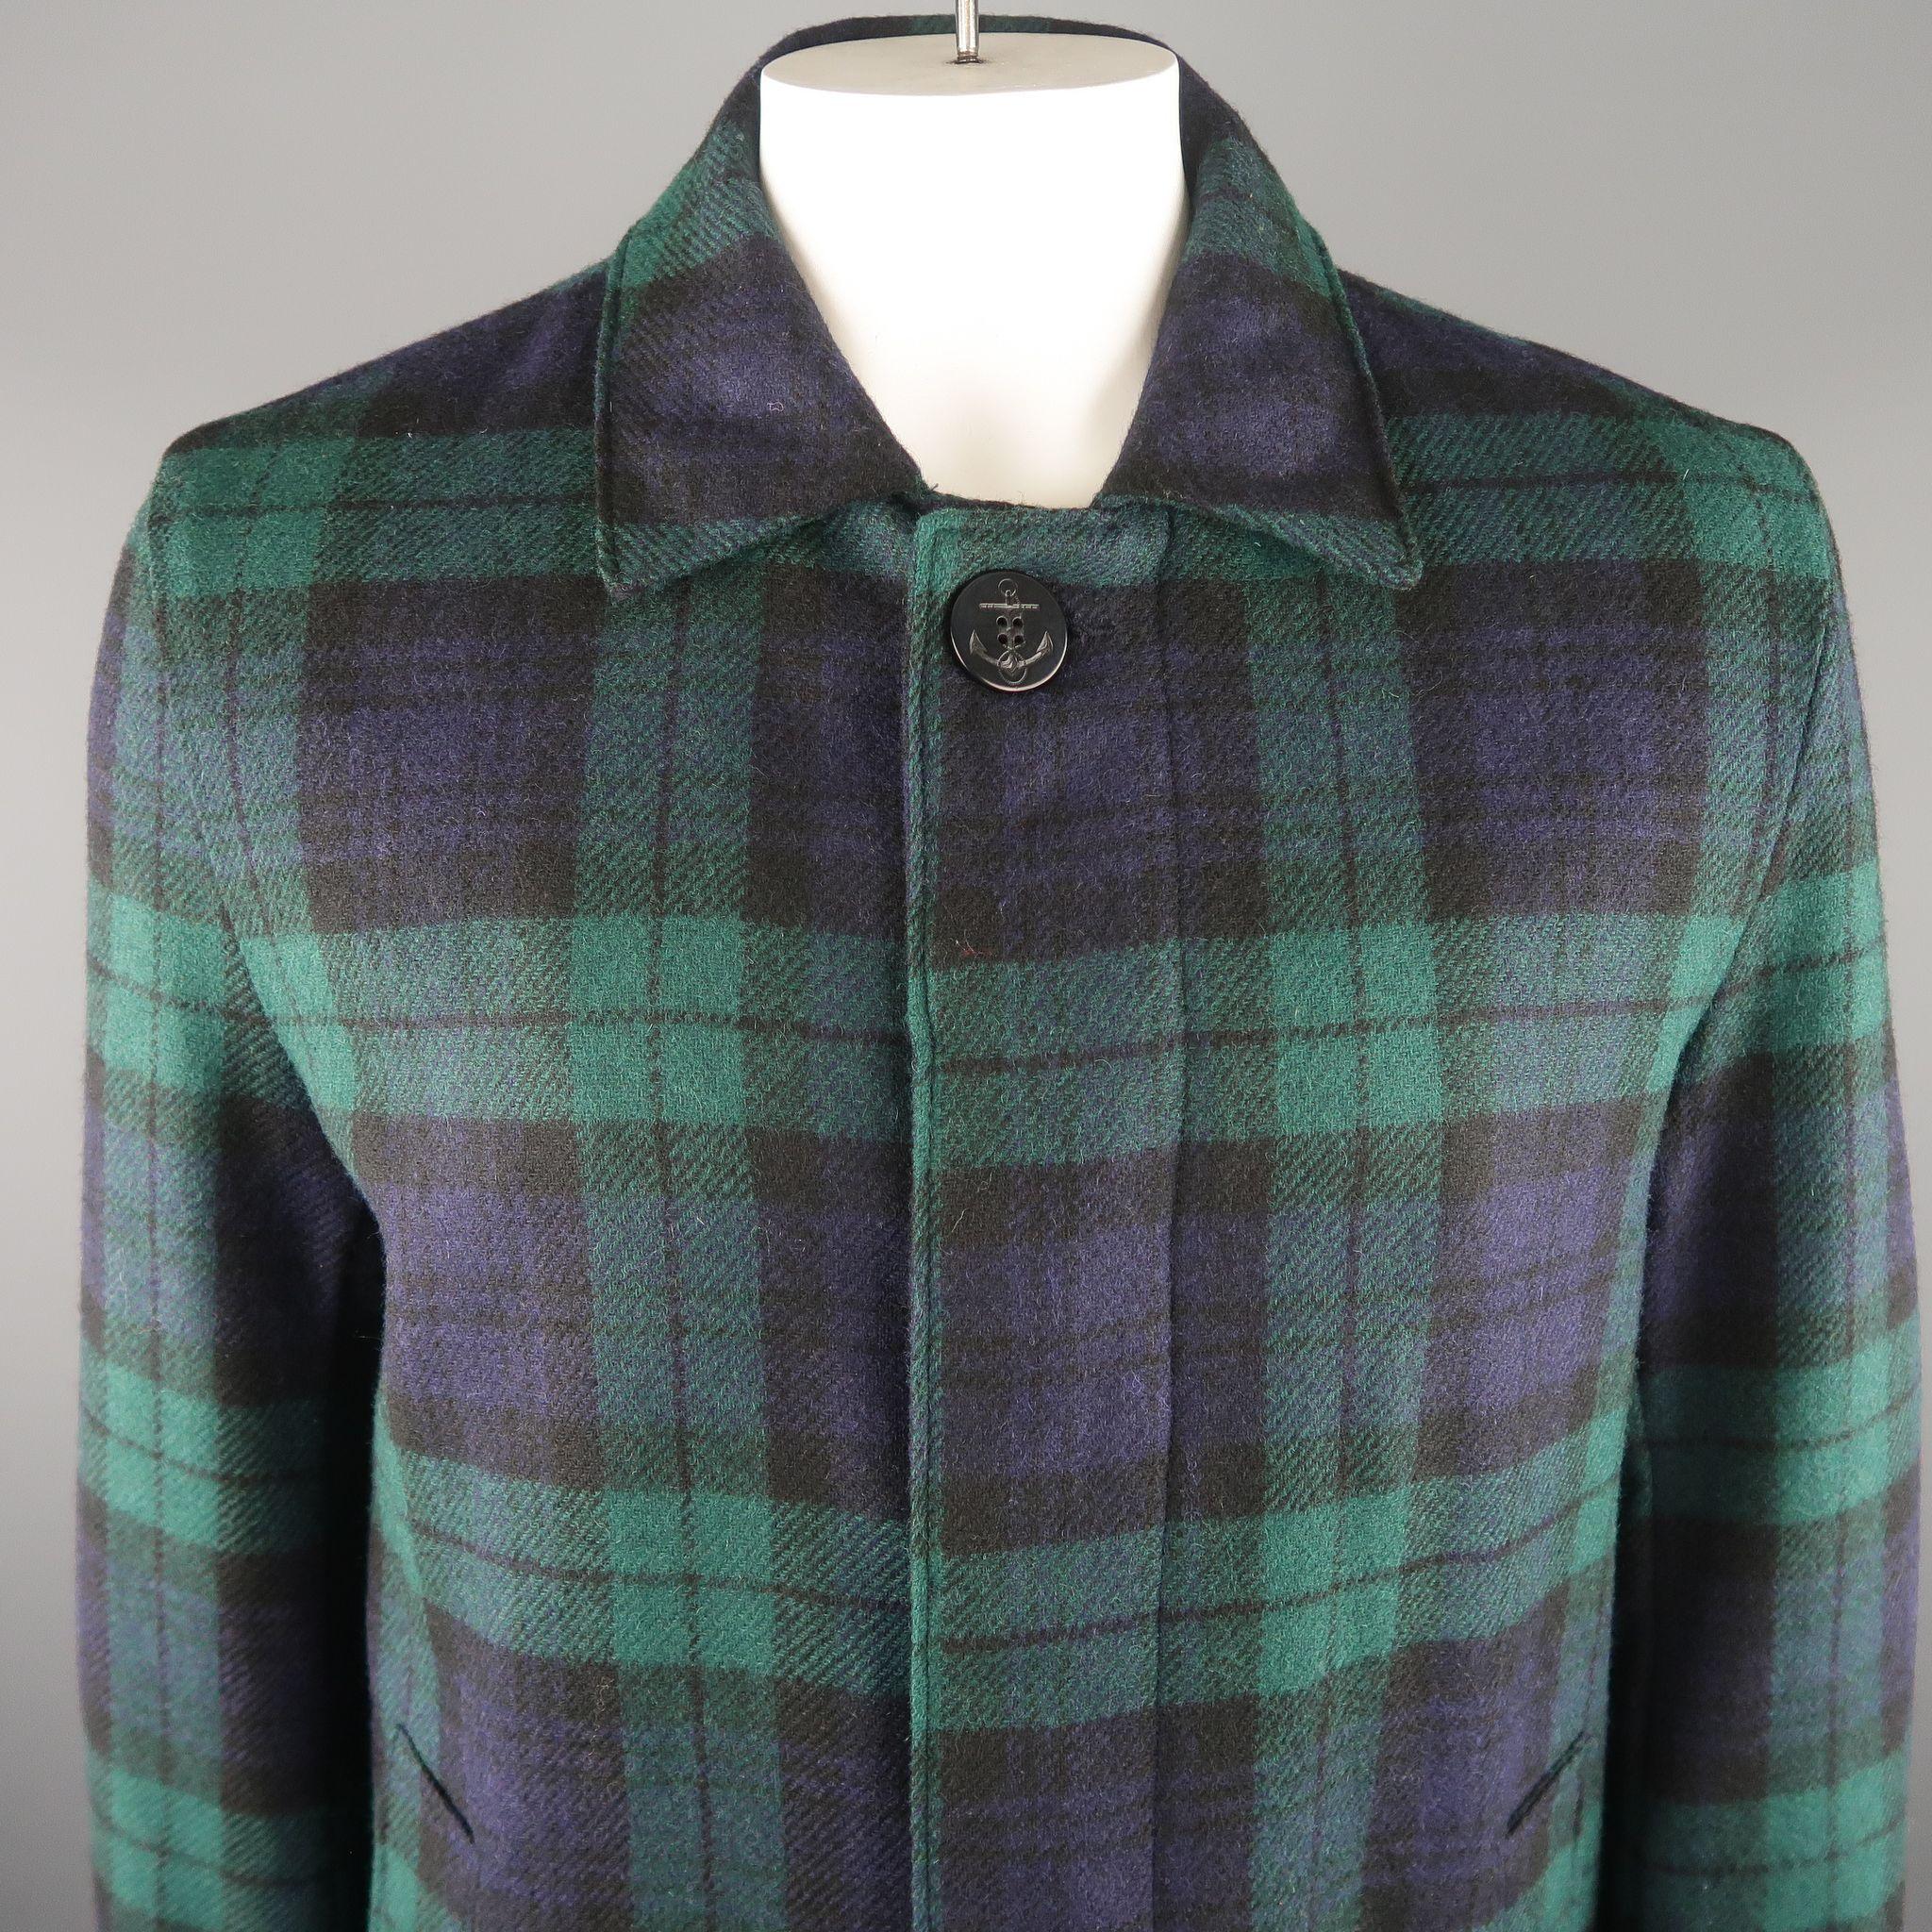 GOLDEN BEAR X UNIONMADE long coat comes in navy and green blackwatch plaid wool material, with hidden buttons, slit pockets and ribbed cuffs. Made in USA.
 
Brand New.
Marked: L
 
Measurements:
 
Shoulder: 18  in.
Chest: 47  in.
Sleeve: 28.5 